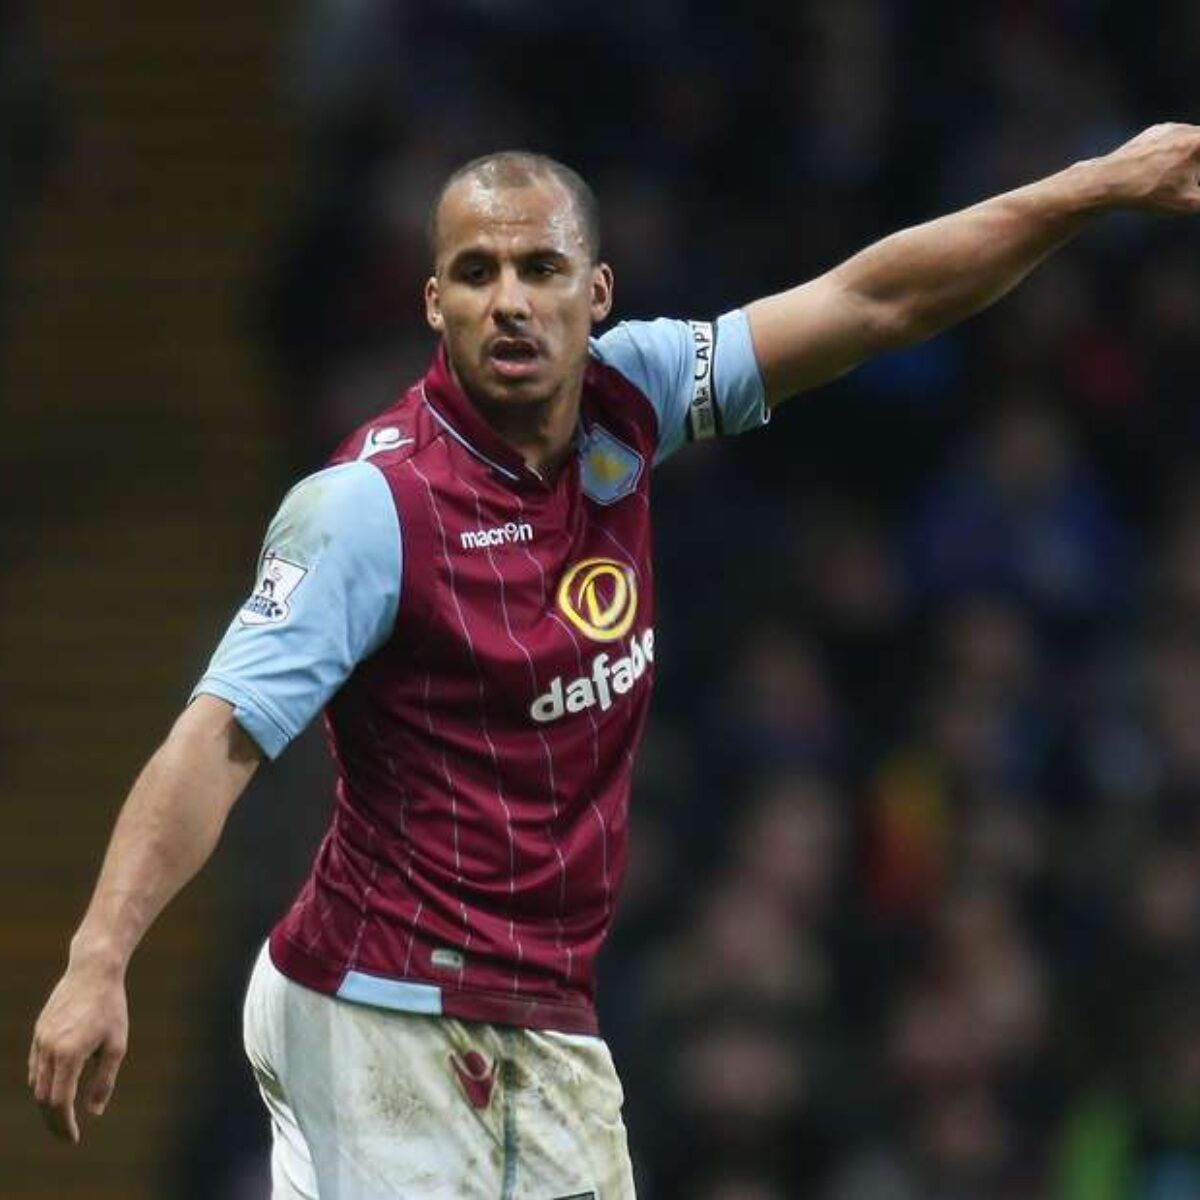 Gabriel Agbonlahor 'falling over' photo from Aston Villa v Liverpool in  2014 finally released | GiveMeSport